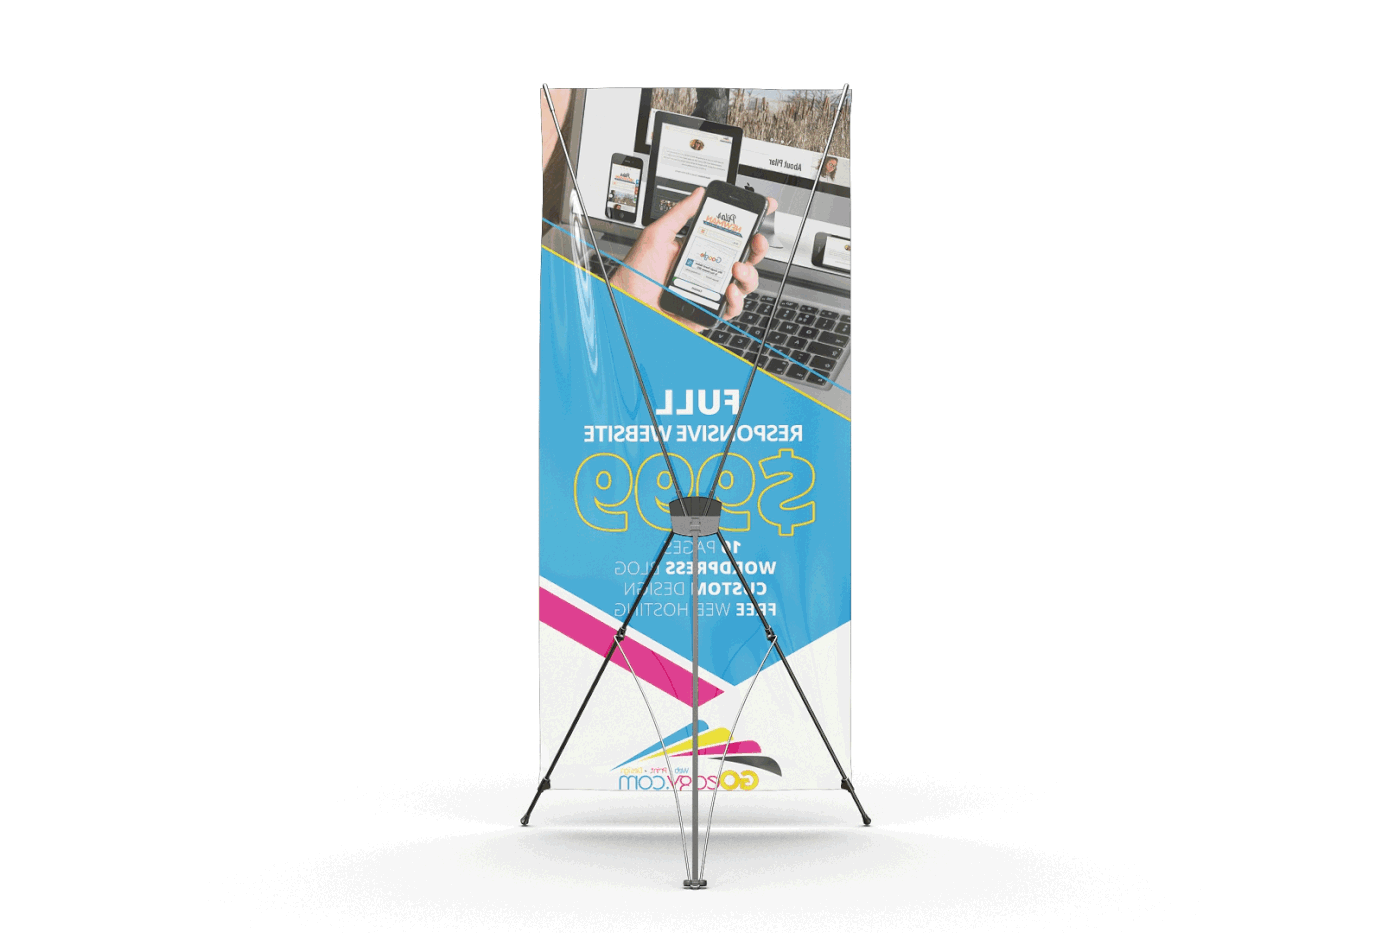 X - Stand banner stand banners exhibit displays Vinyl banners gif print design  large format